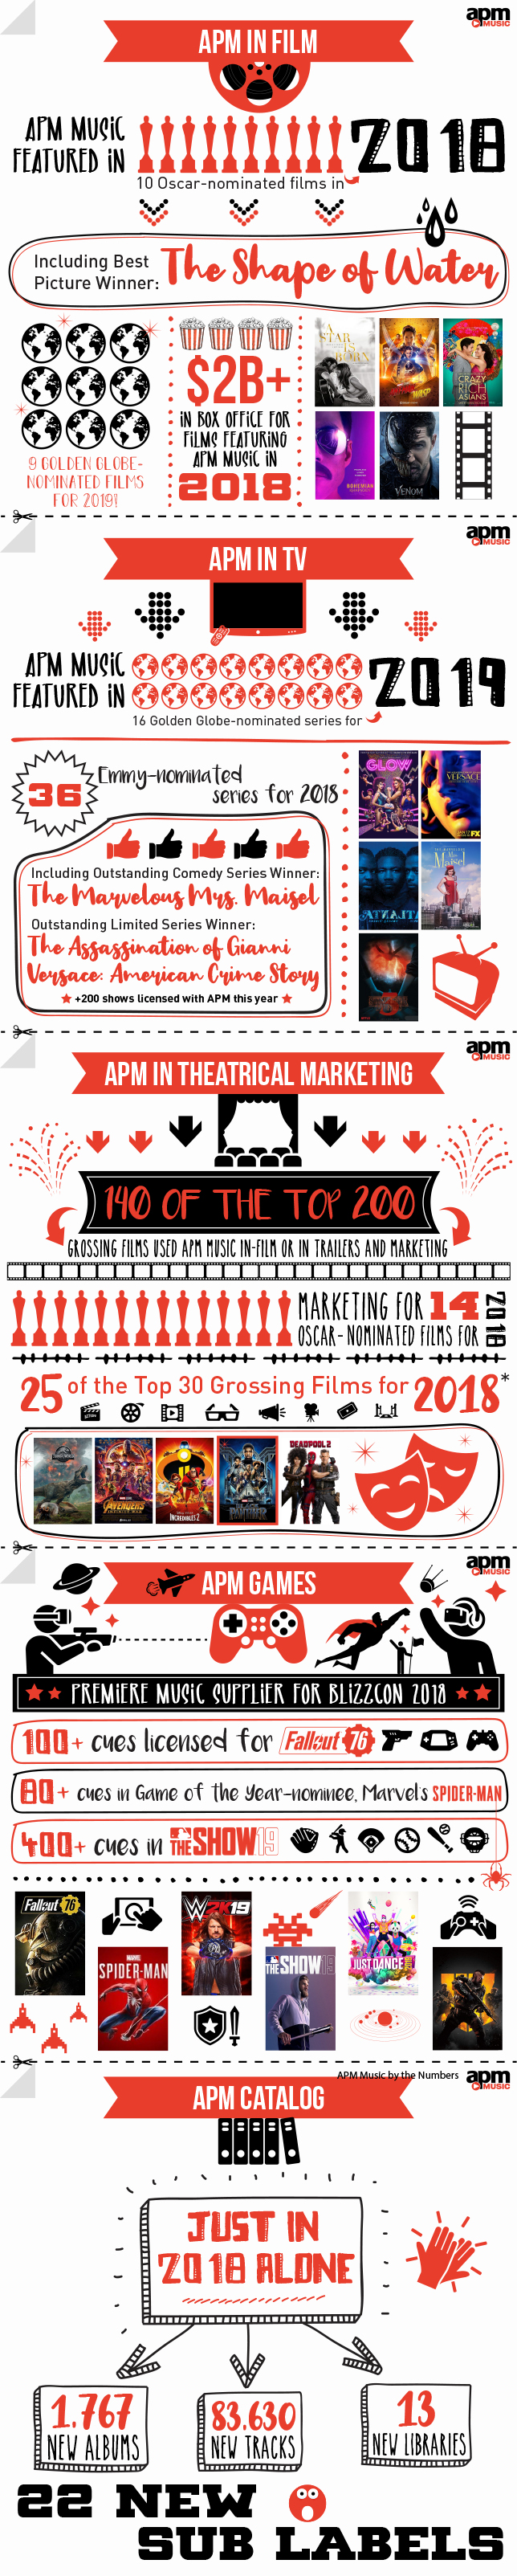 APM By The Numbers 2018 Infographic